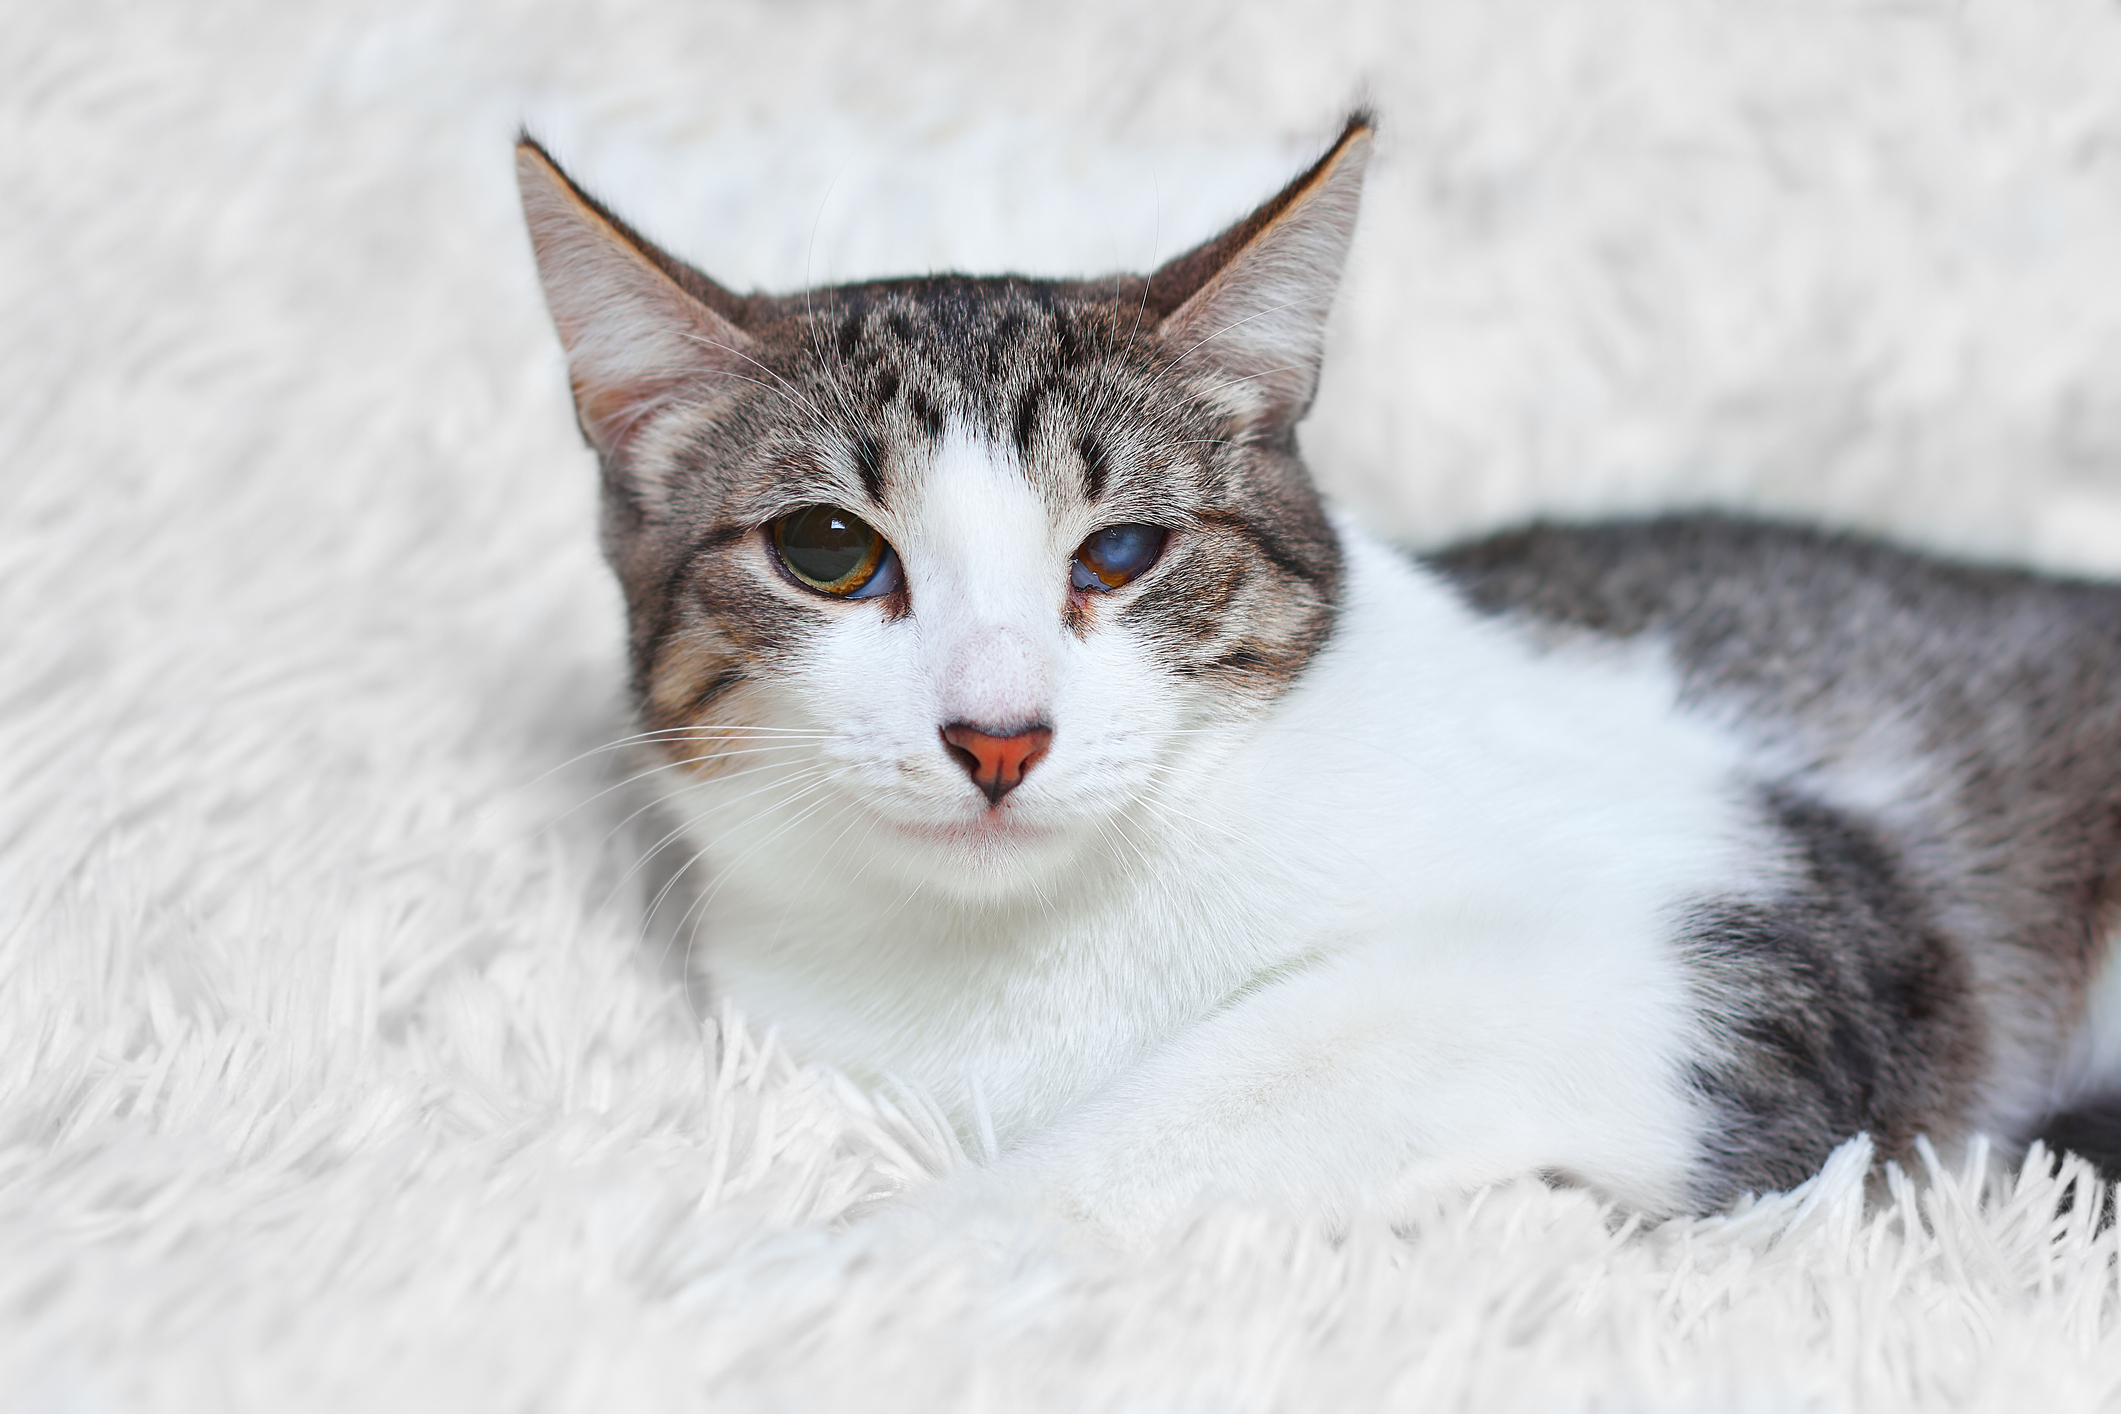 A grey and white cat with one cloudy eye sits on a comfortable white shag carpet